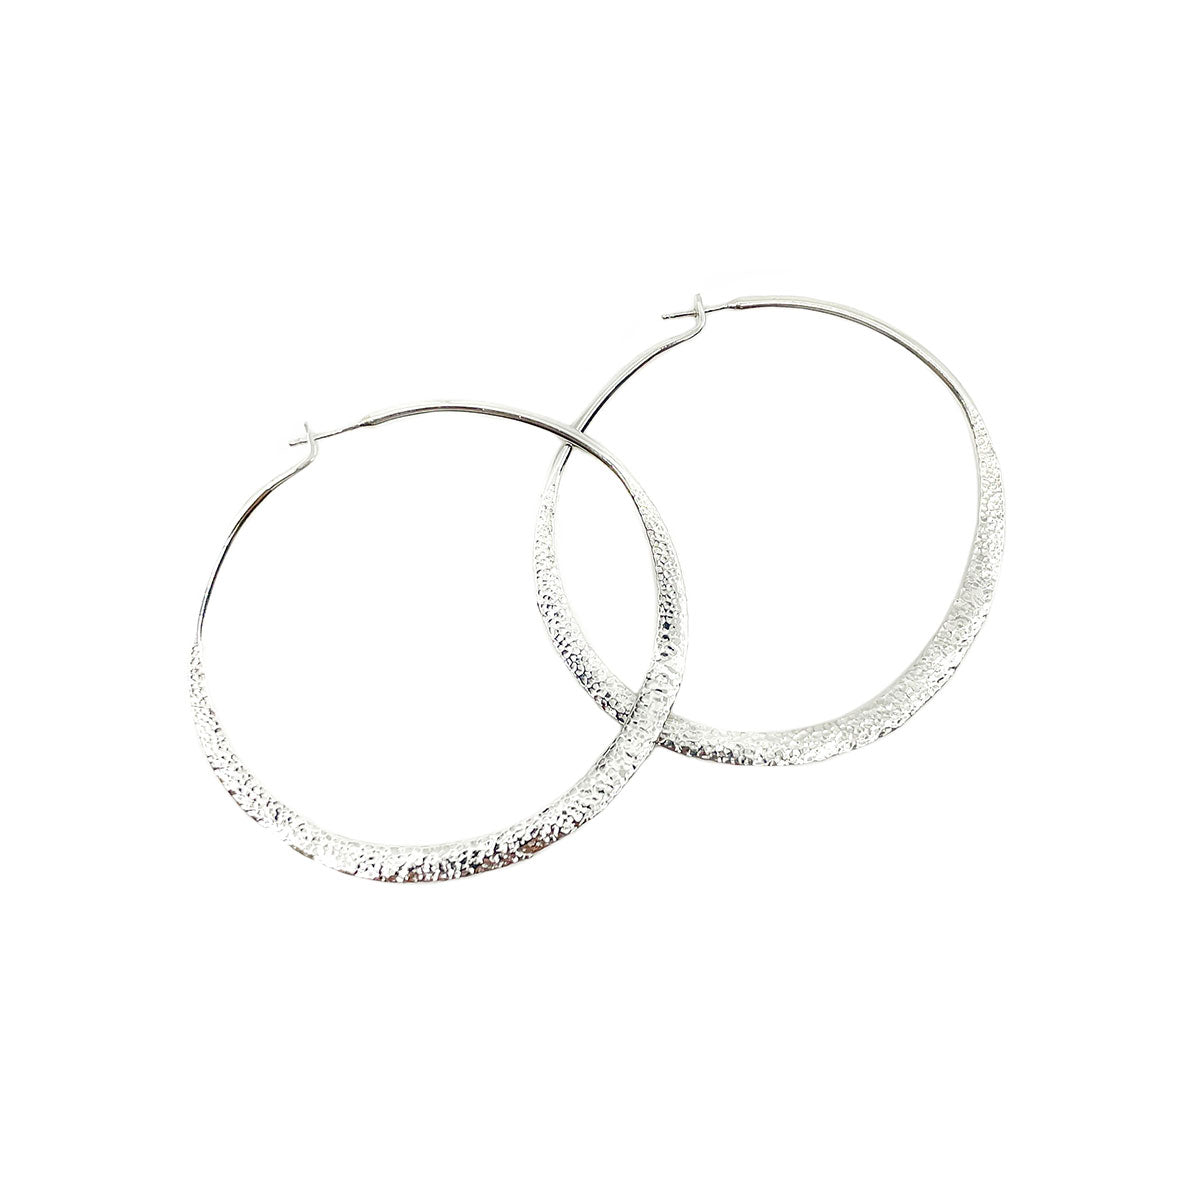 Load image into Gallery viewer, Sterling silver hand hammered and textured, wavy hoop earrings by Elgin Tom Sterling silver posts  Approximate dimensions: Hoops are 2.25 inches in diameter and just shy of 1/4 of an inch wide at widest flat area on bottom of hoop
